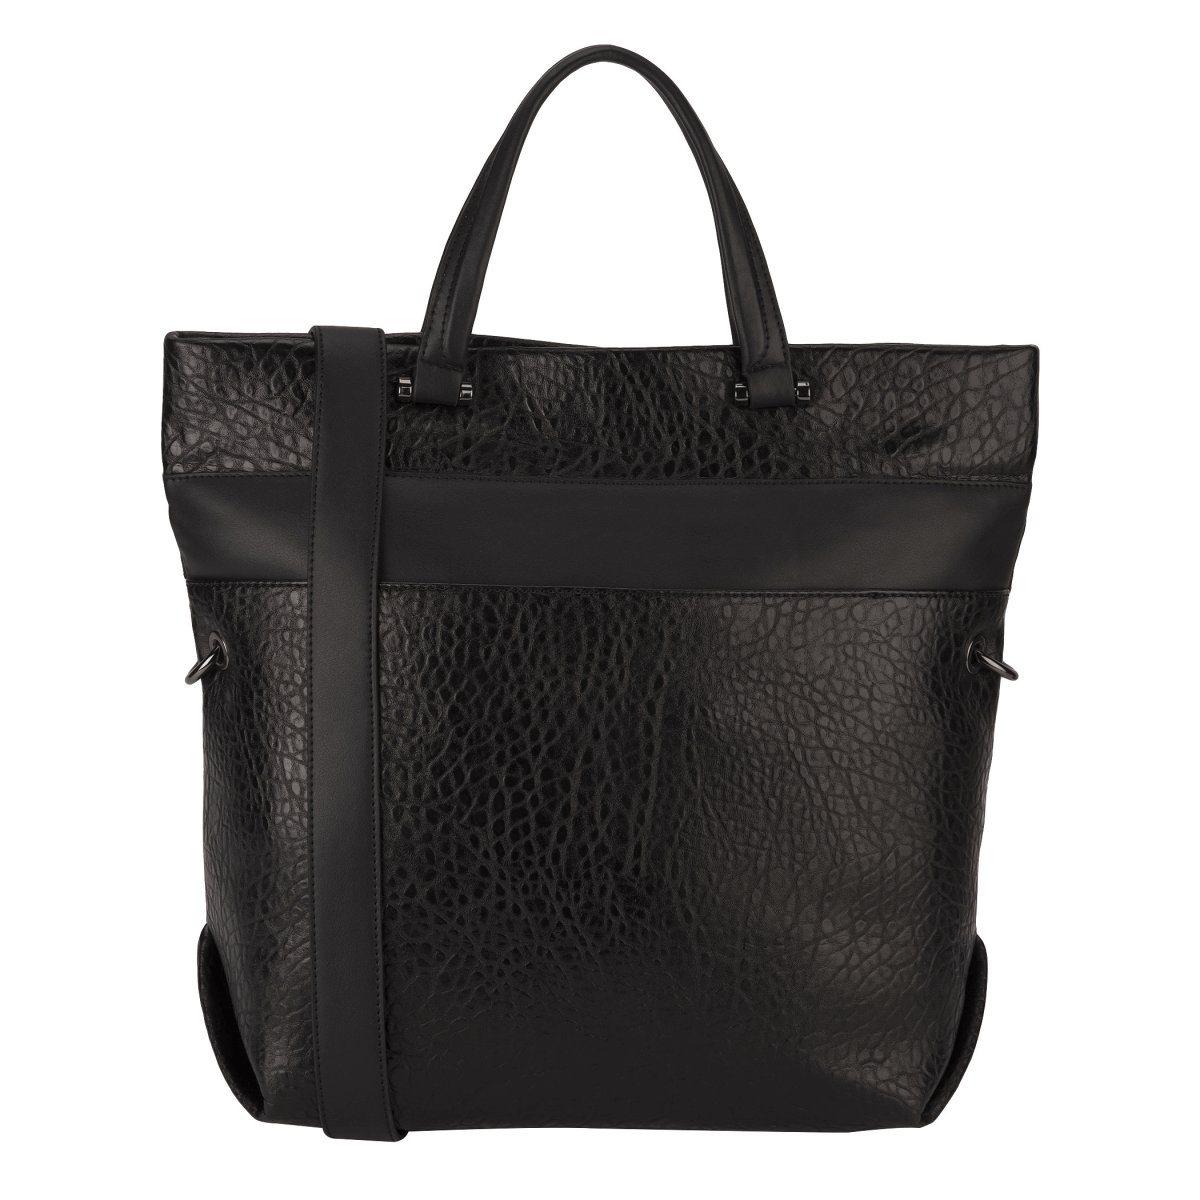 Bolso Tote Nine West Tote F16 09/16 Hb60424307-1Pp